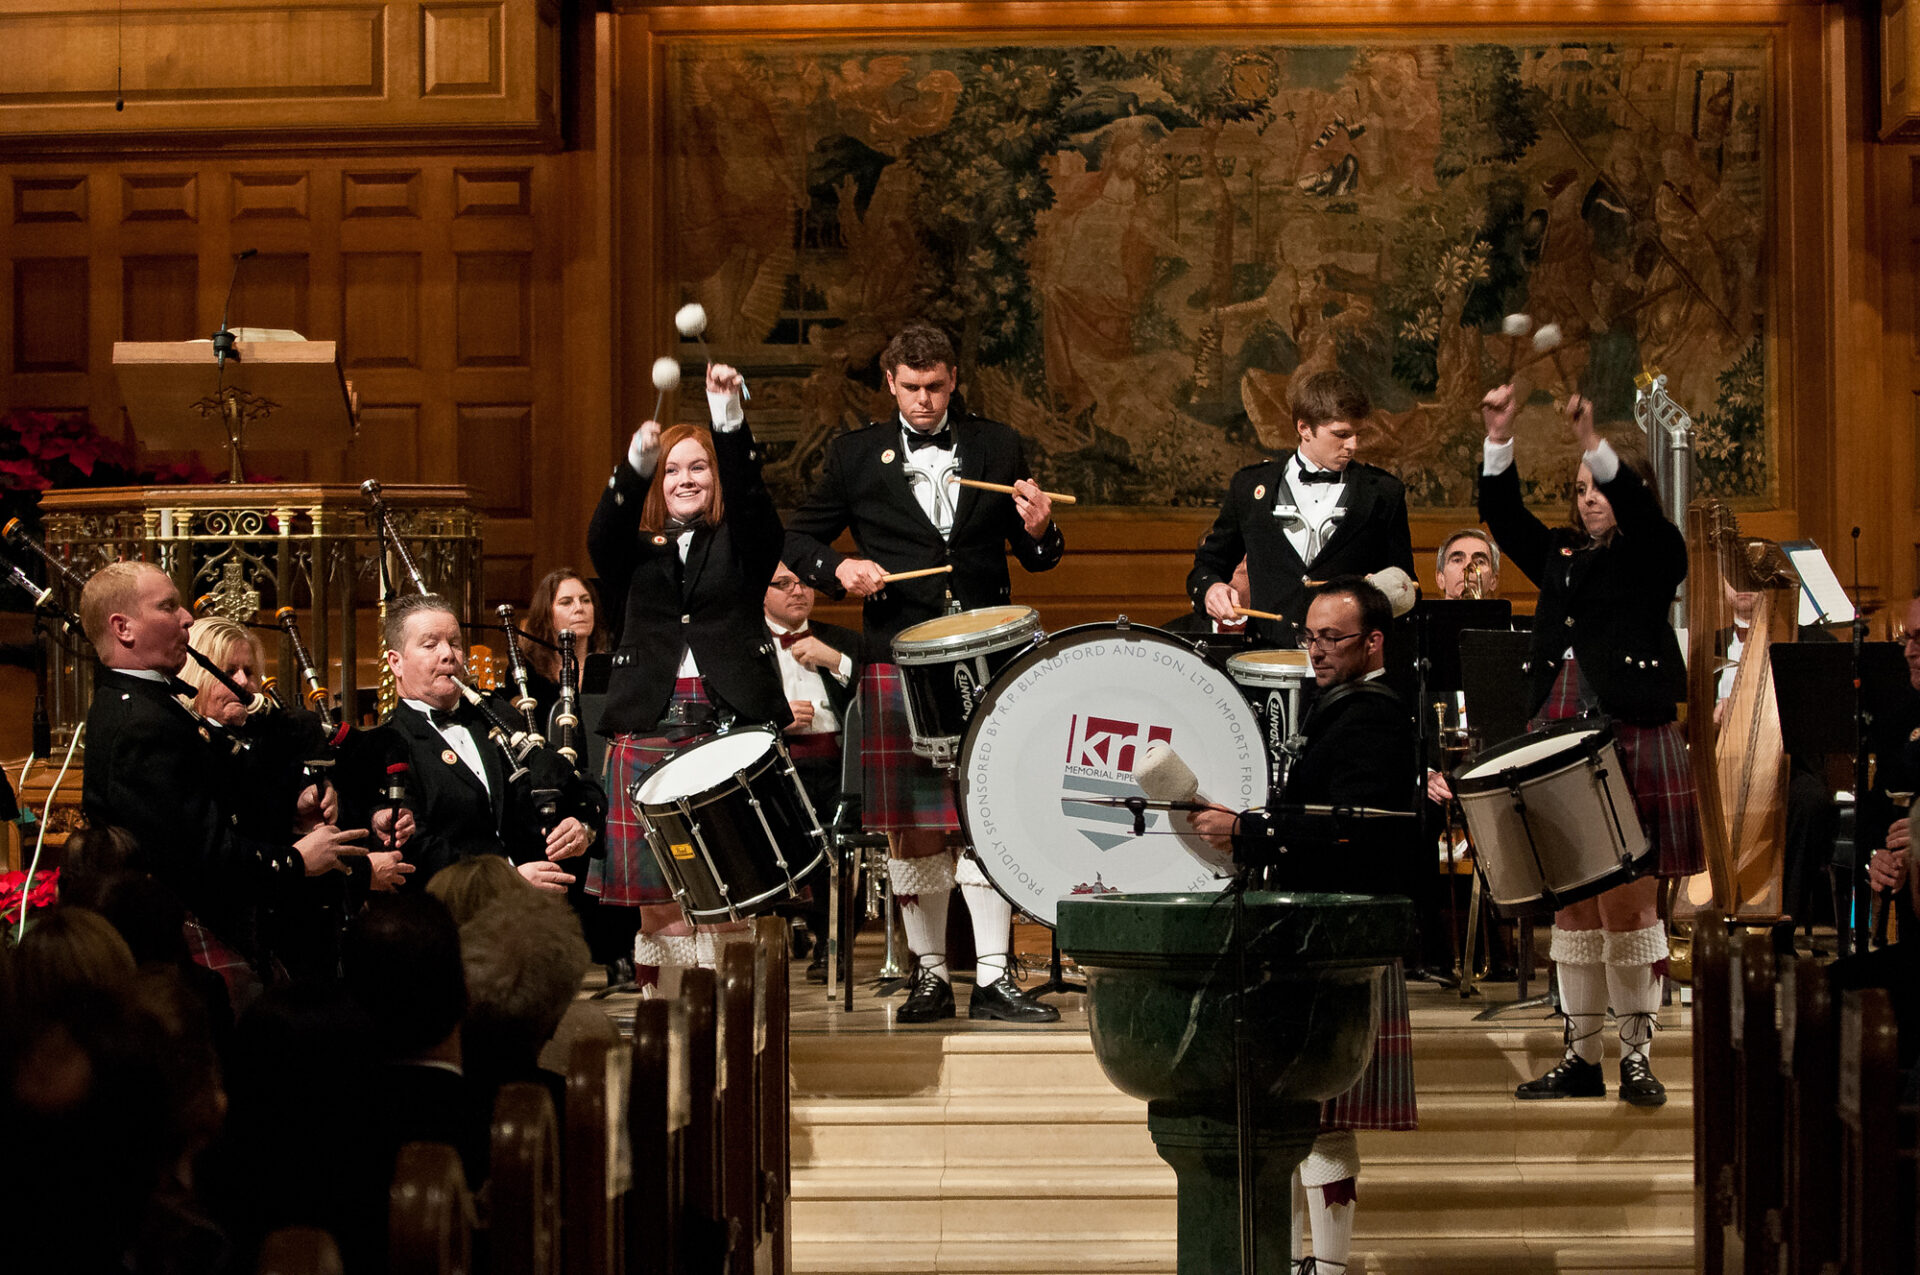 Dec. 23, 2014 – Pipes of Christmas Concerts to be Seen by Audiences around the World